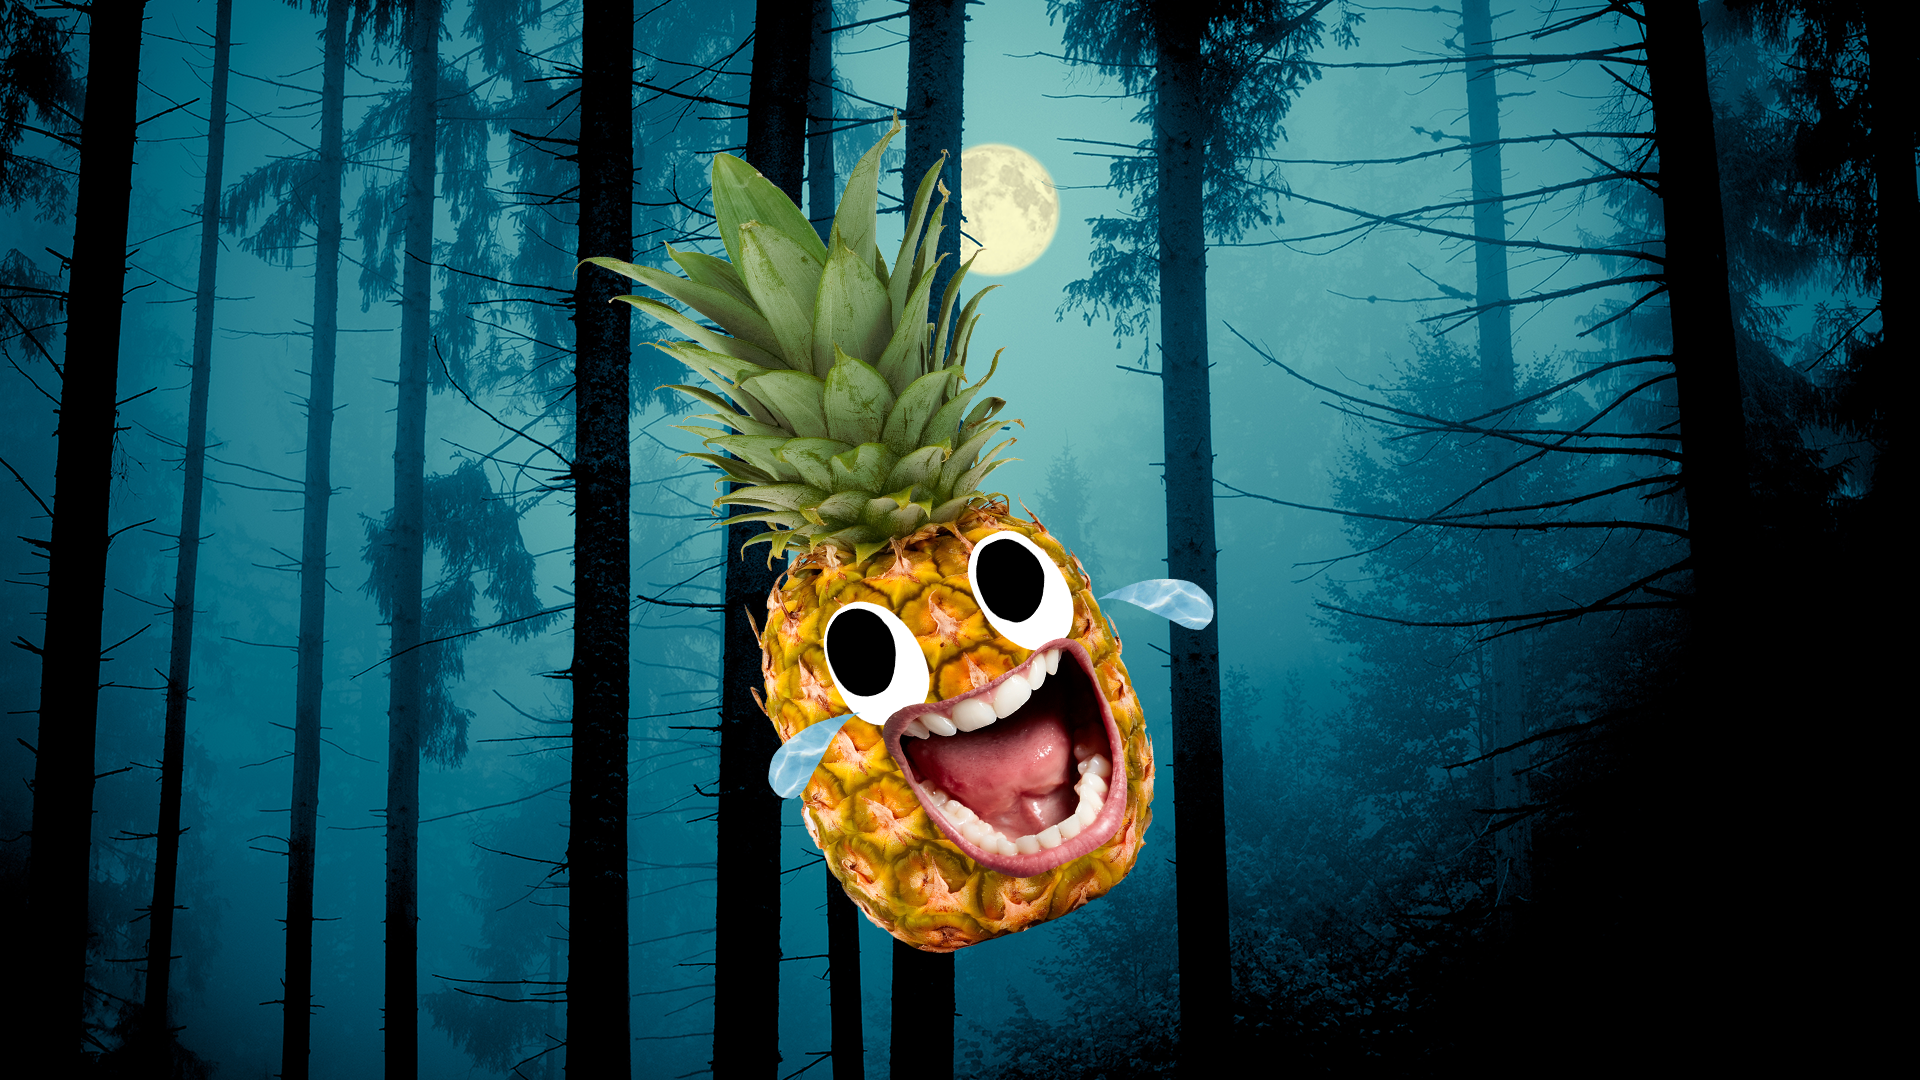 Laughing pineapple in front of a full moon and spooky looking forest